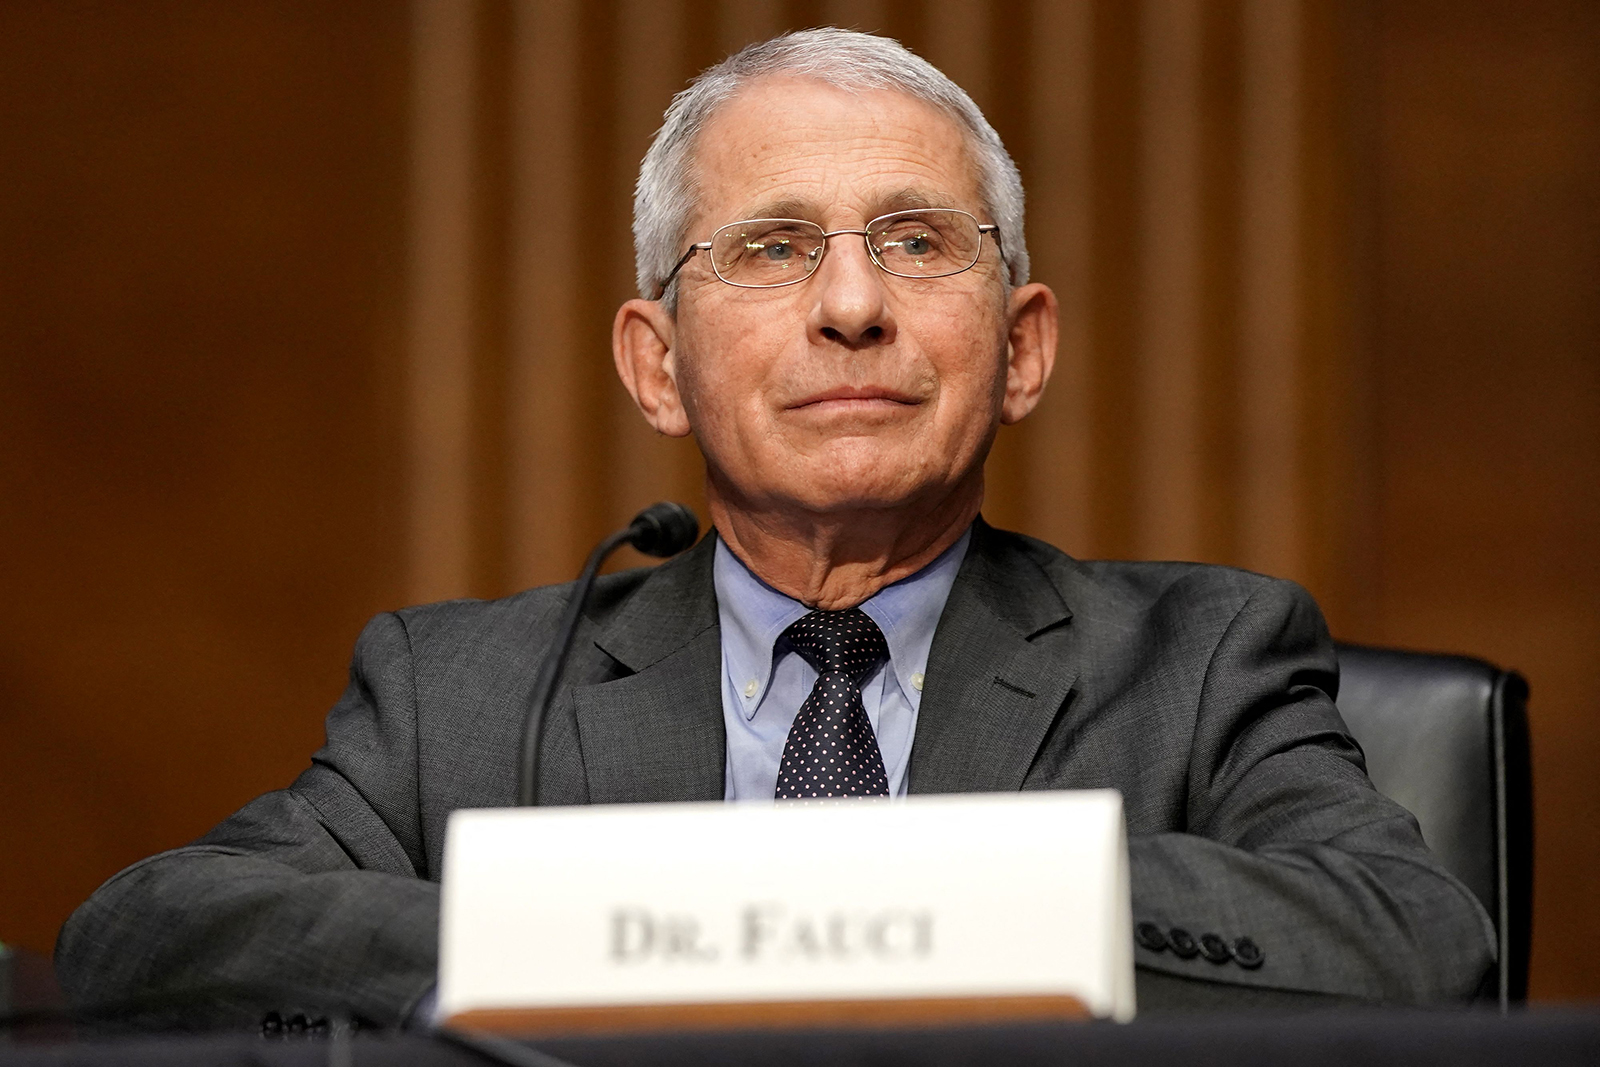 Dr. Anthony Fauci, director of the National Institute of Allergy and Infectious Diseases, speaks during a Senate Health, Education, Labor and Pensions Committee hearing to discuss the on-going federal response to Covid-19 on May 11, 2021 at the US Capitol in Washington, DC.